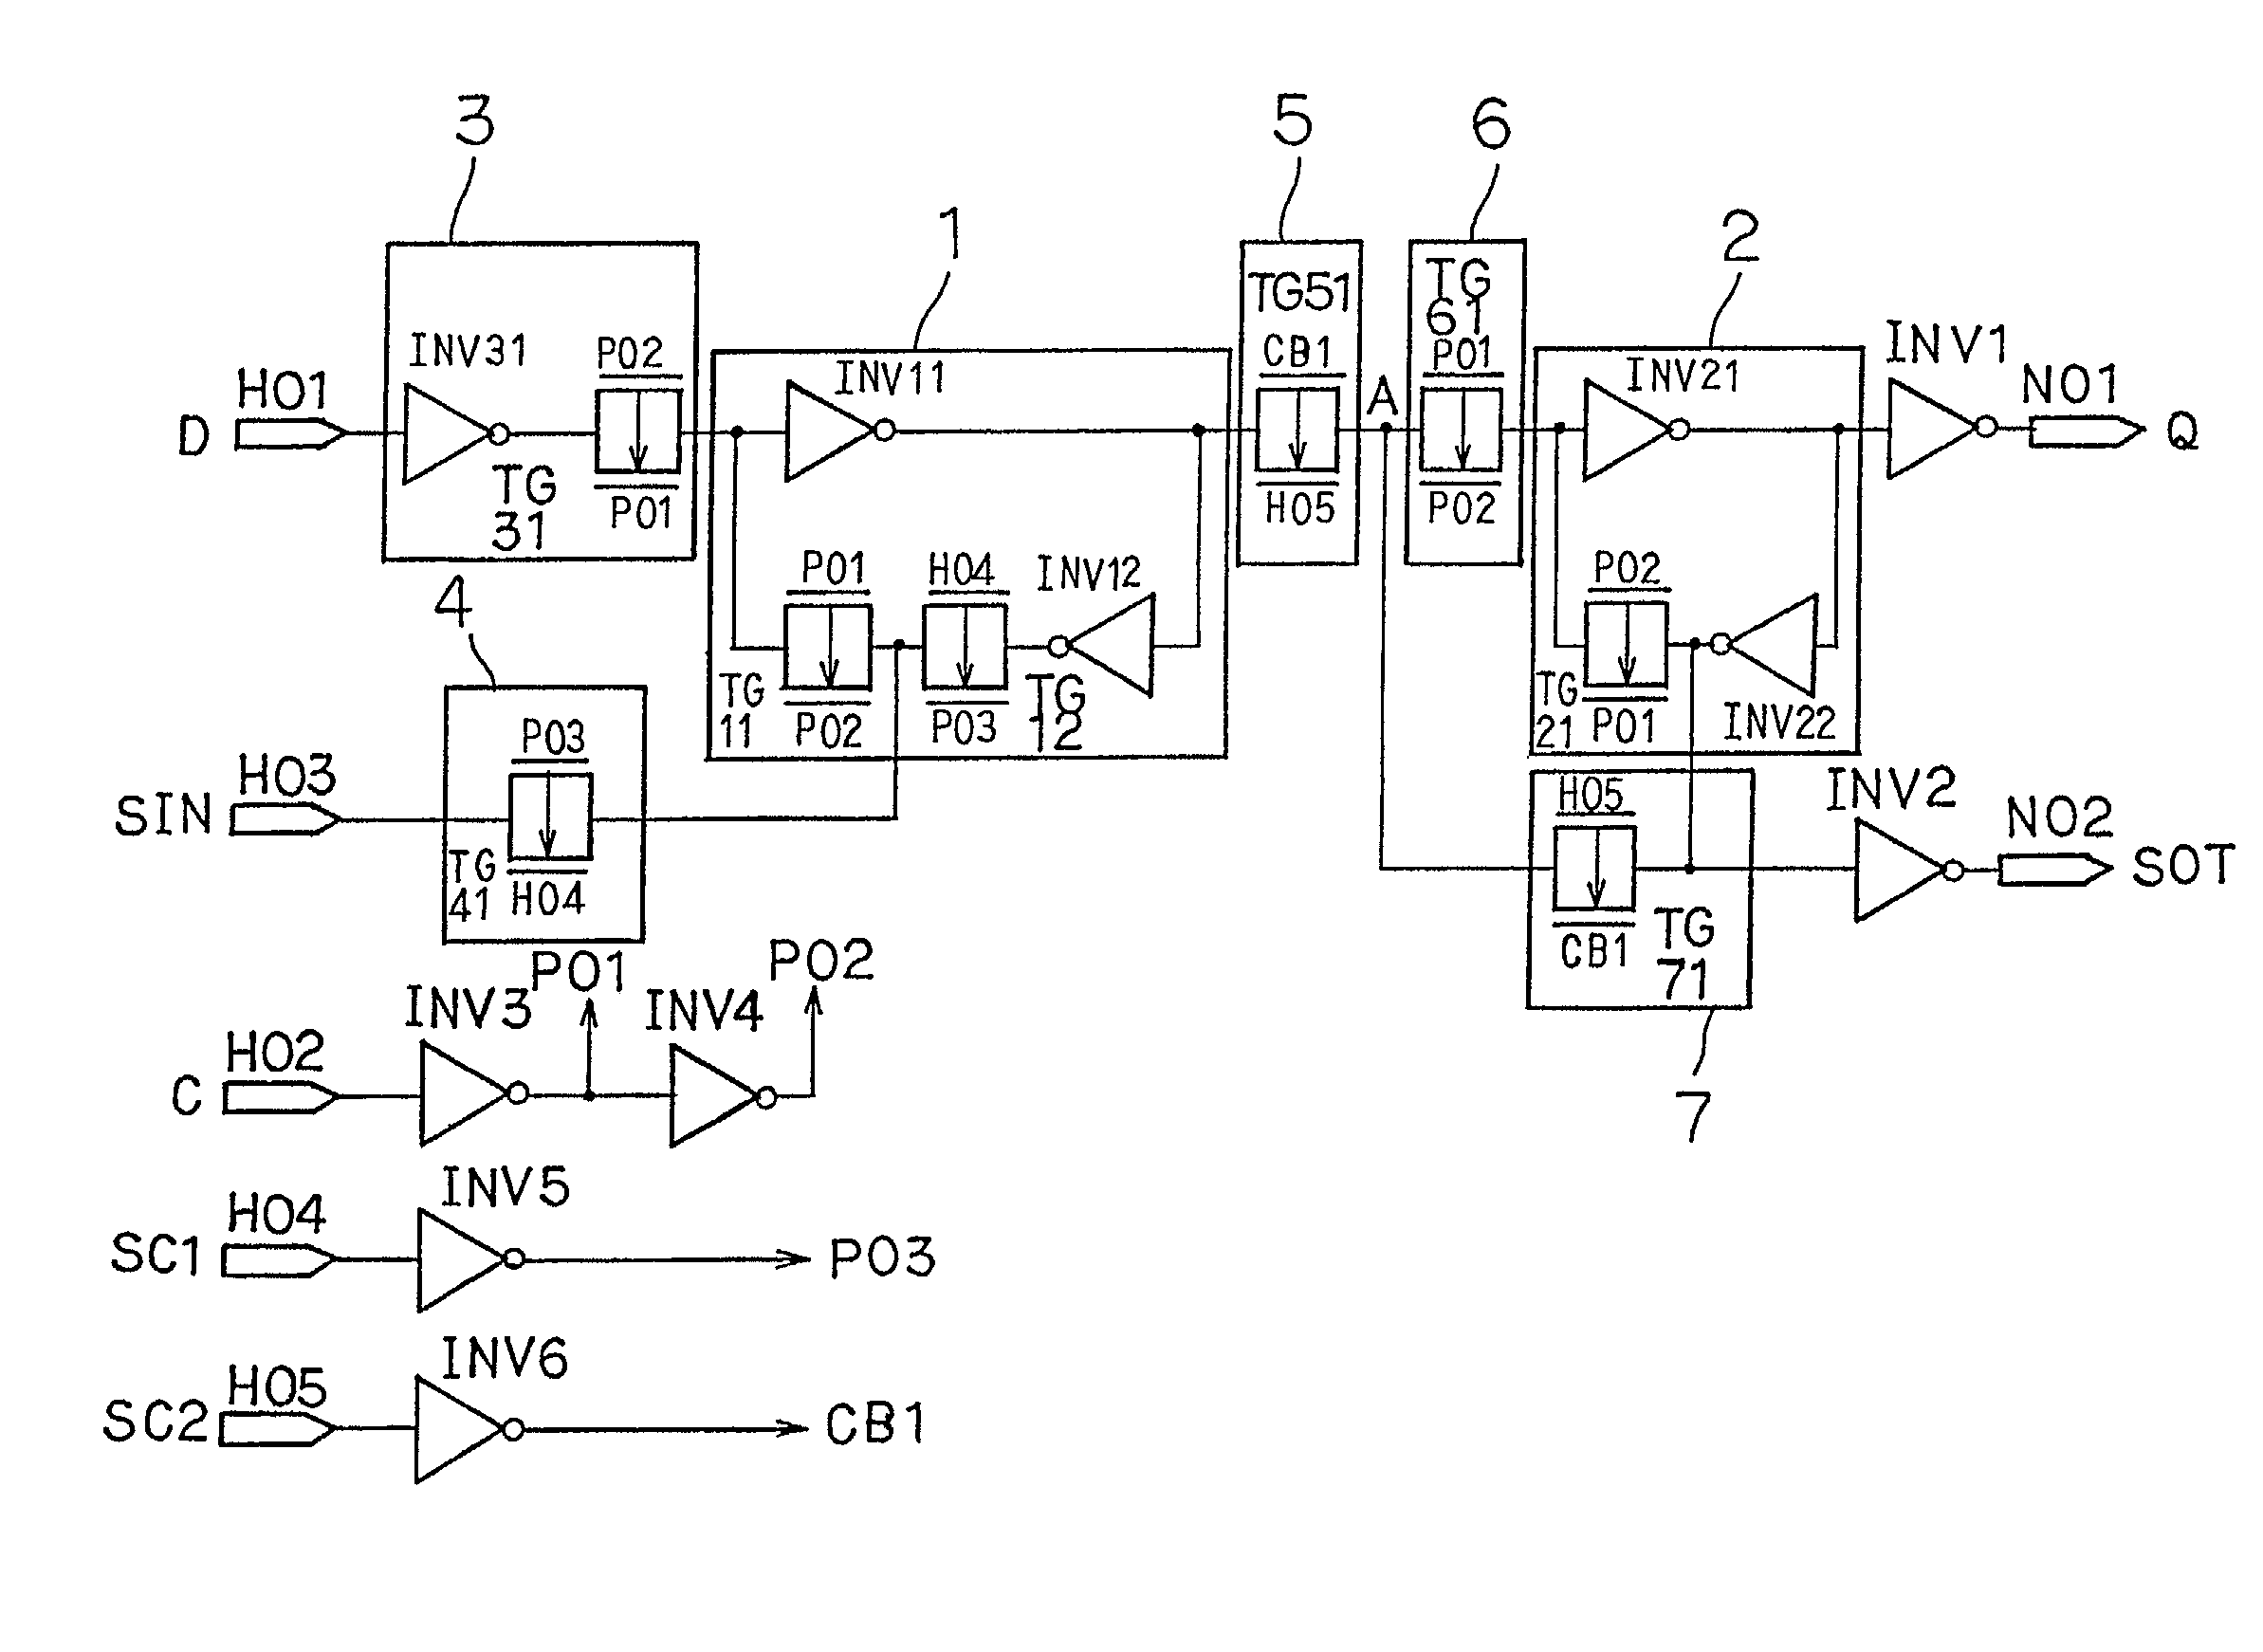 Master-slave-type scanning flip-flop circuit for high-speed operation with reduced load capacity of clock controller